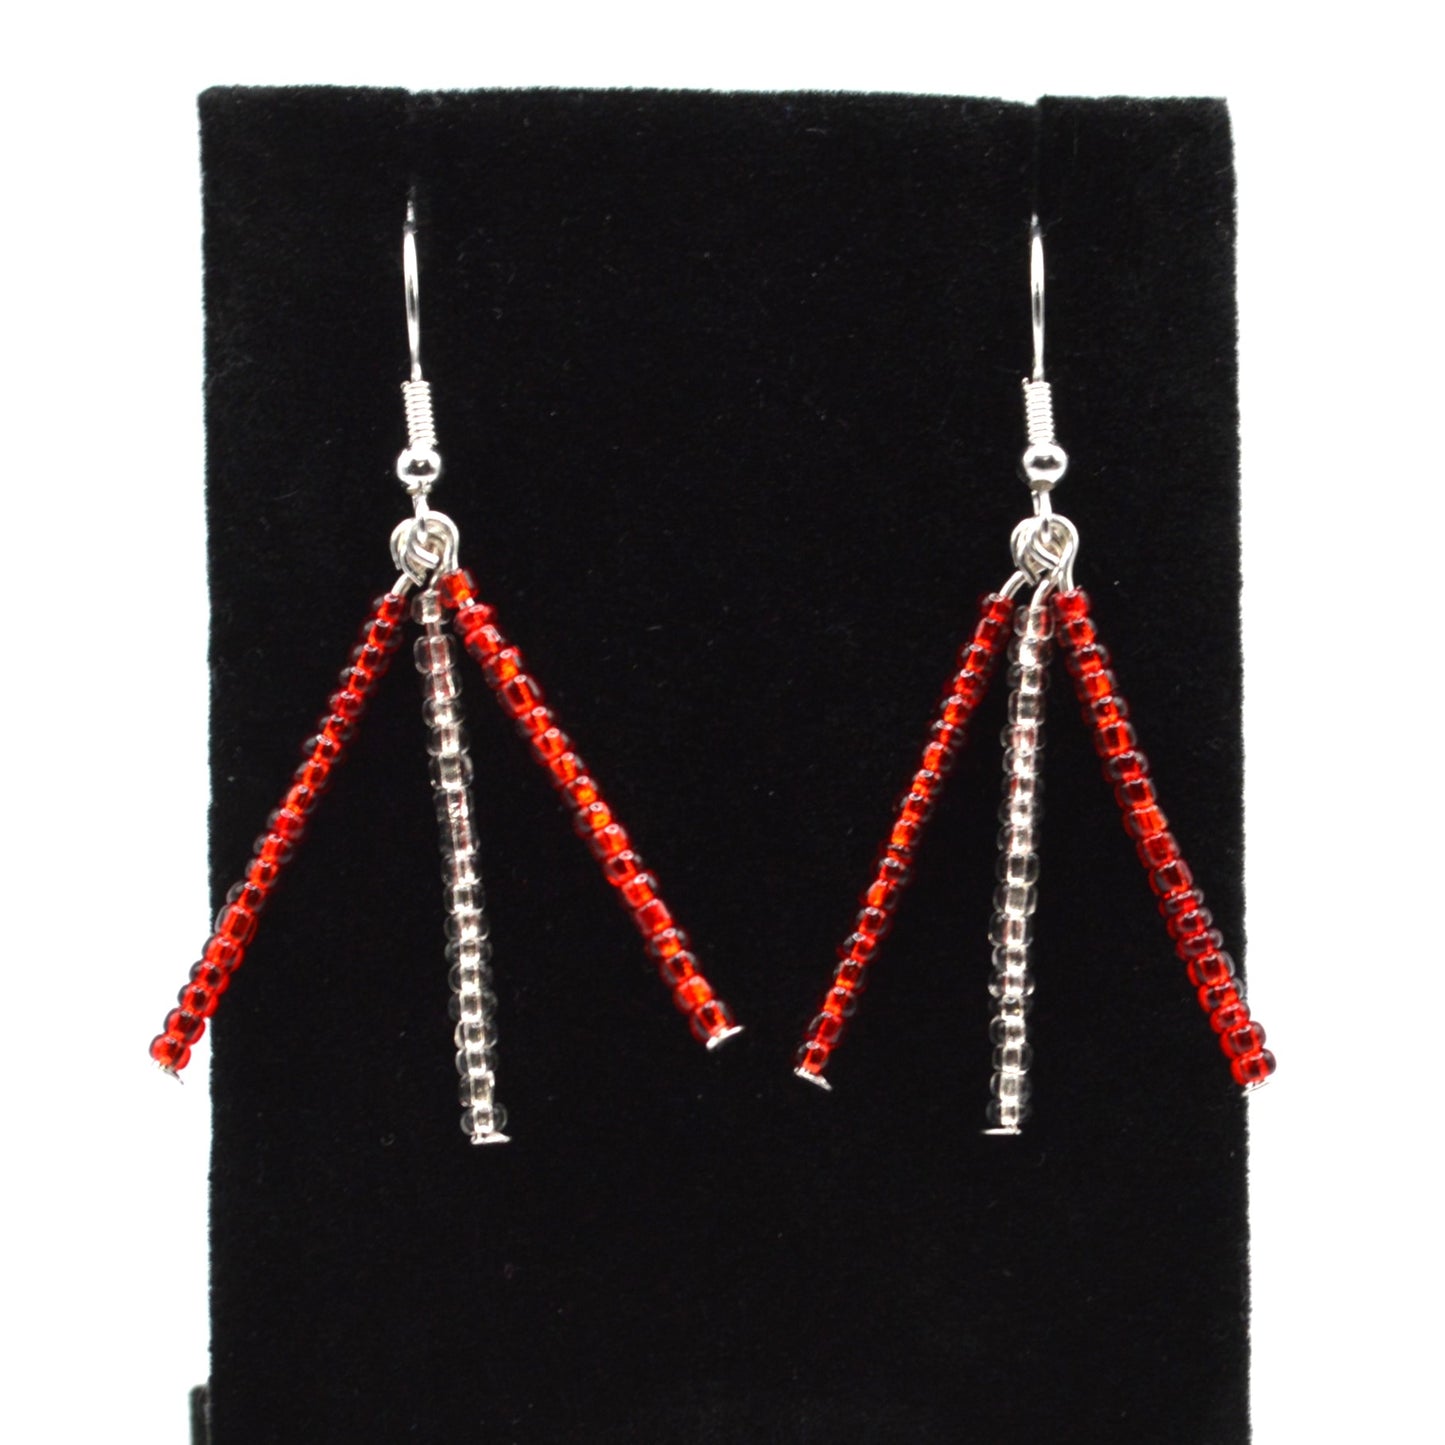 Red and Clear Seed Bead Earrings